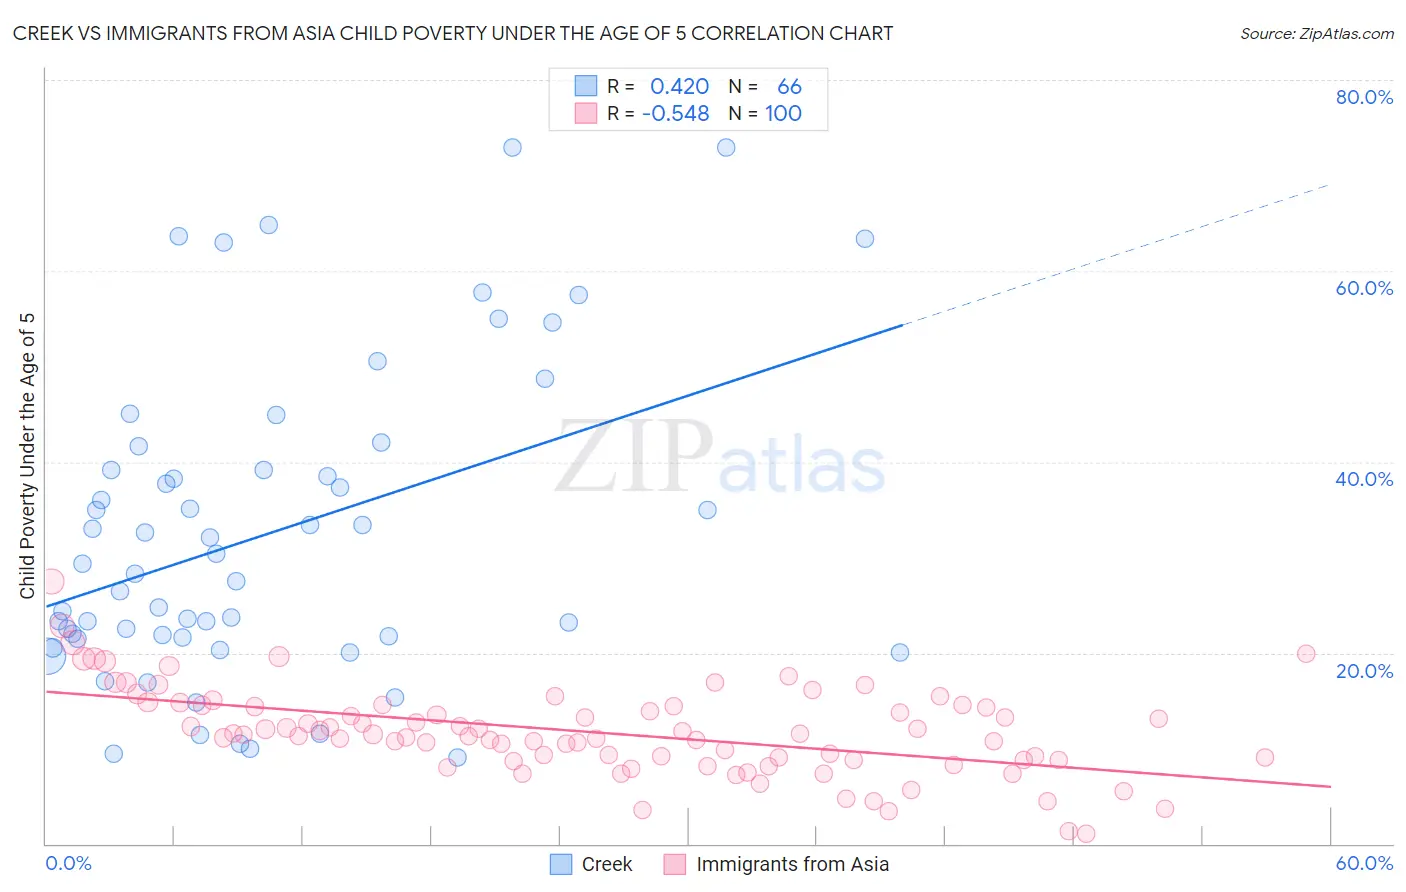 Creek vs Immigrants from Asia Child Poverty Under the Age of 5